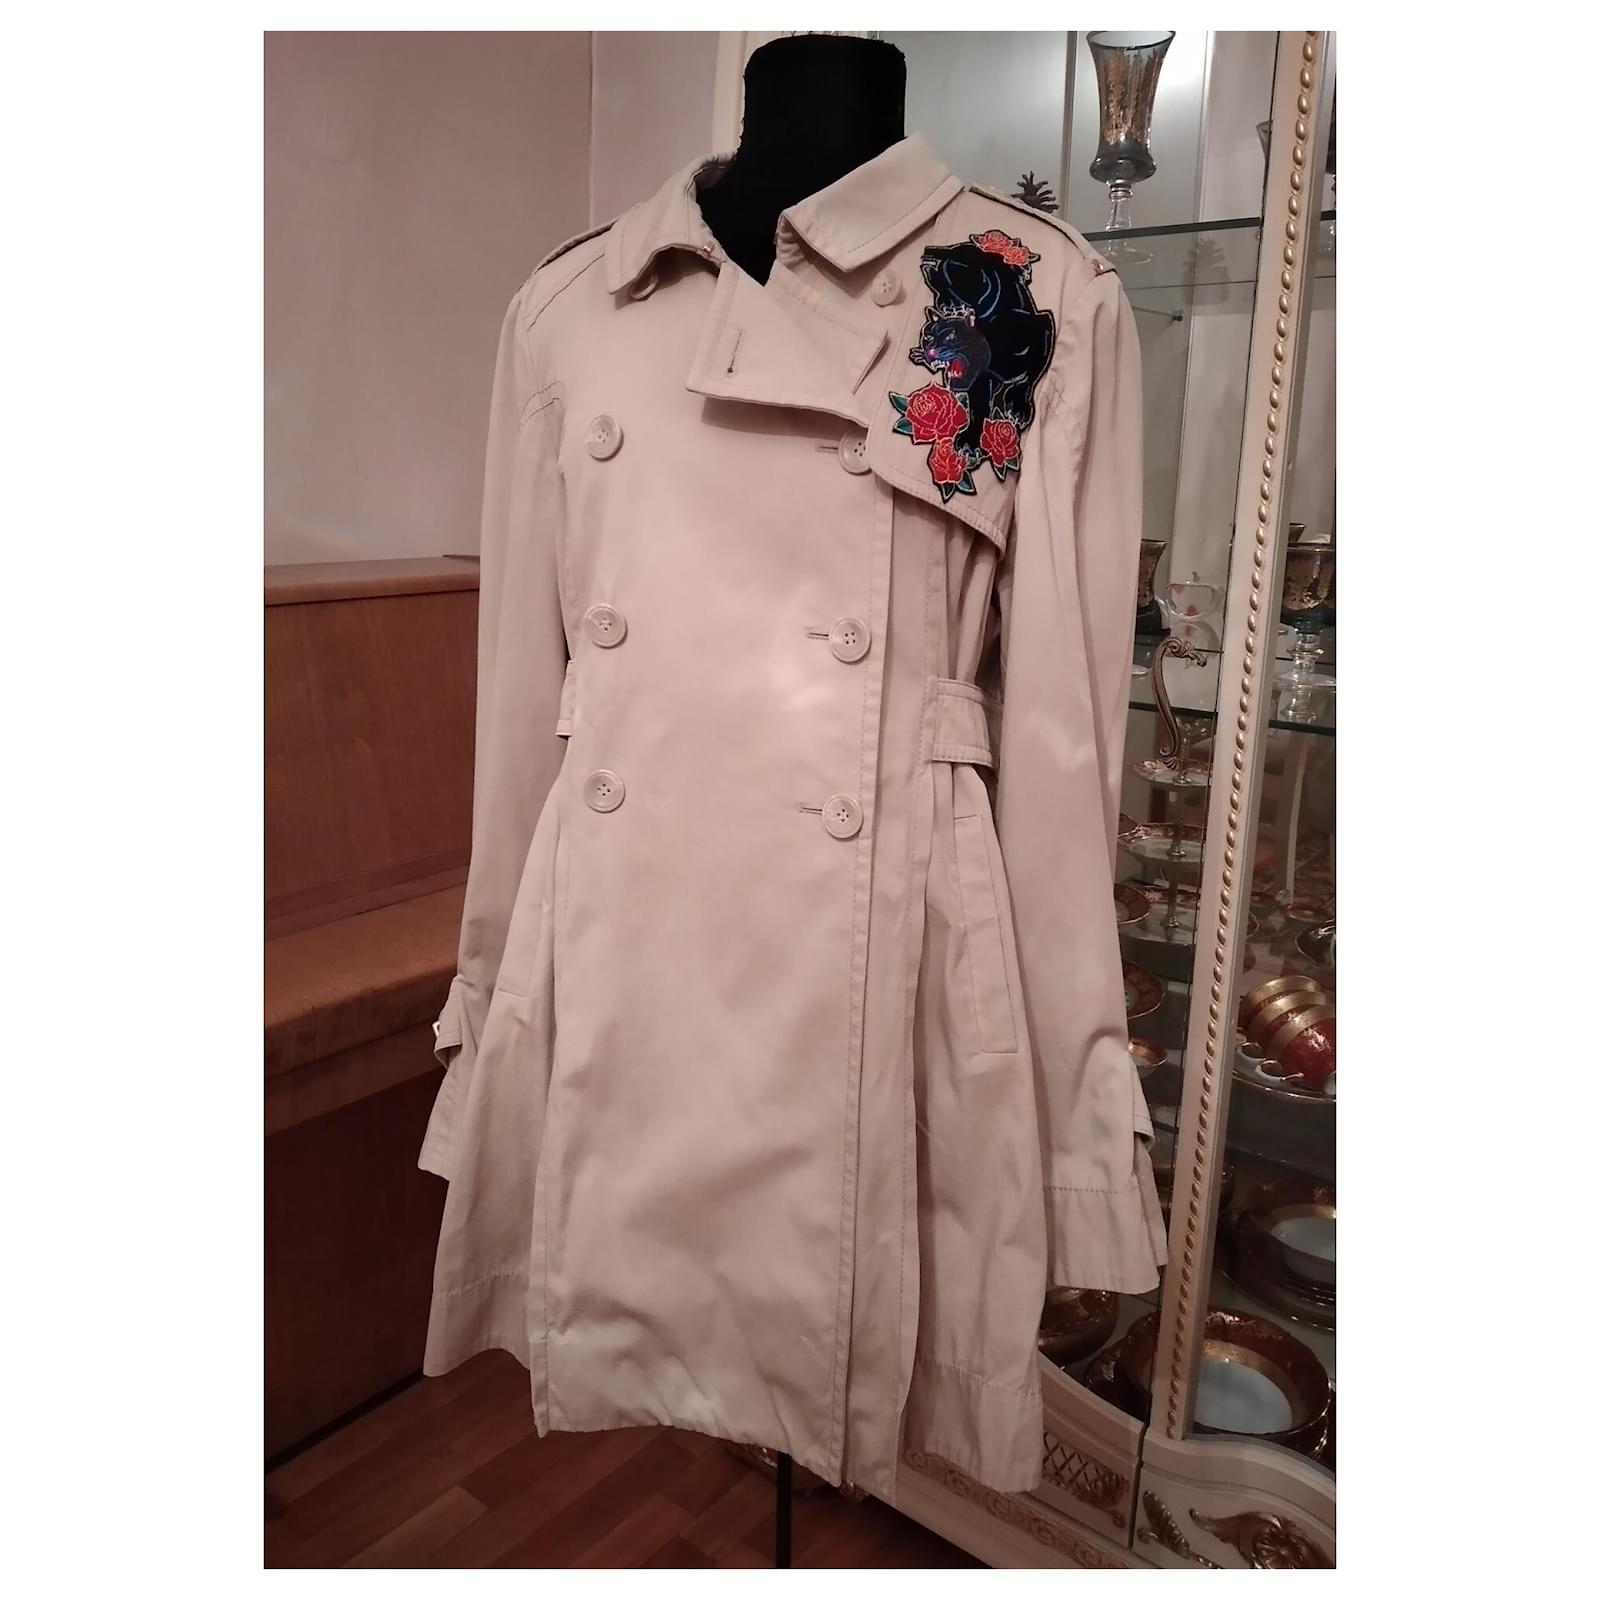 GUCCI Girls Beige Cotton Embroidered Trench Coat